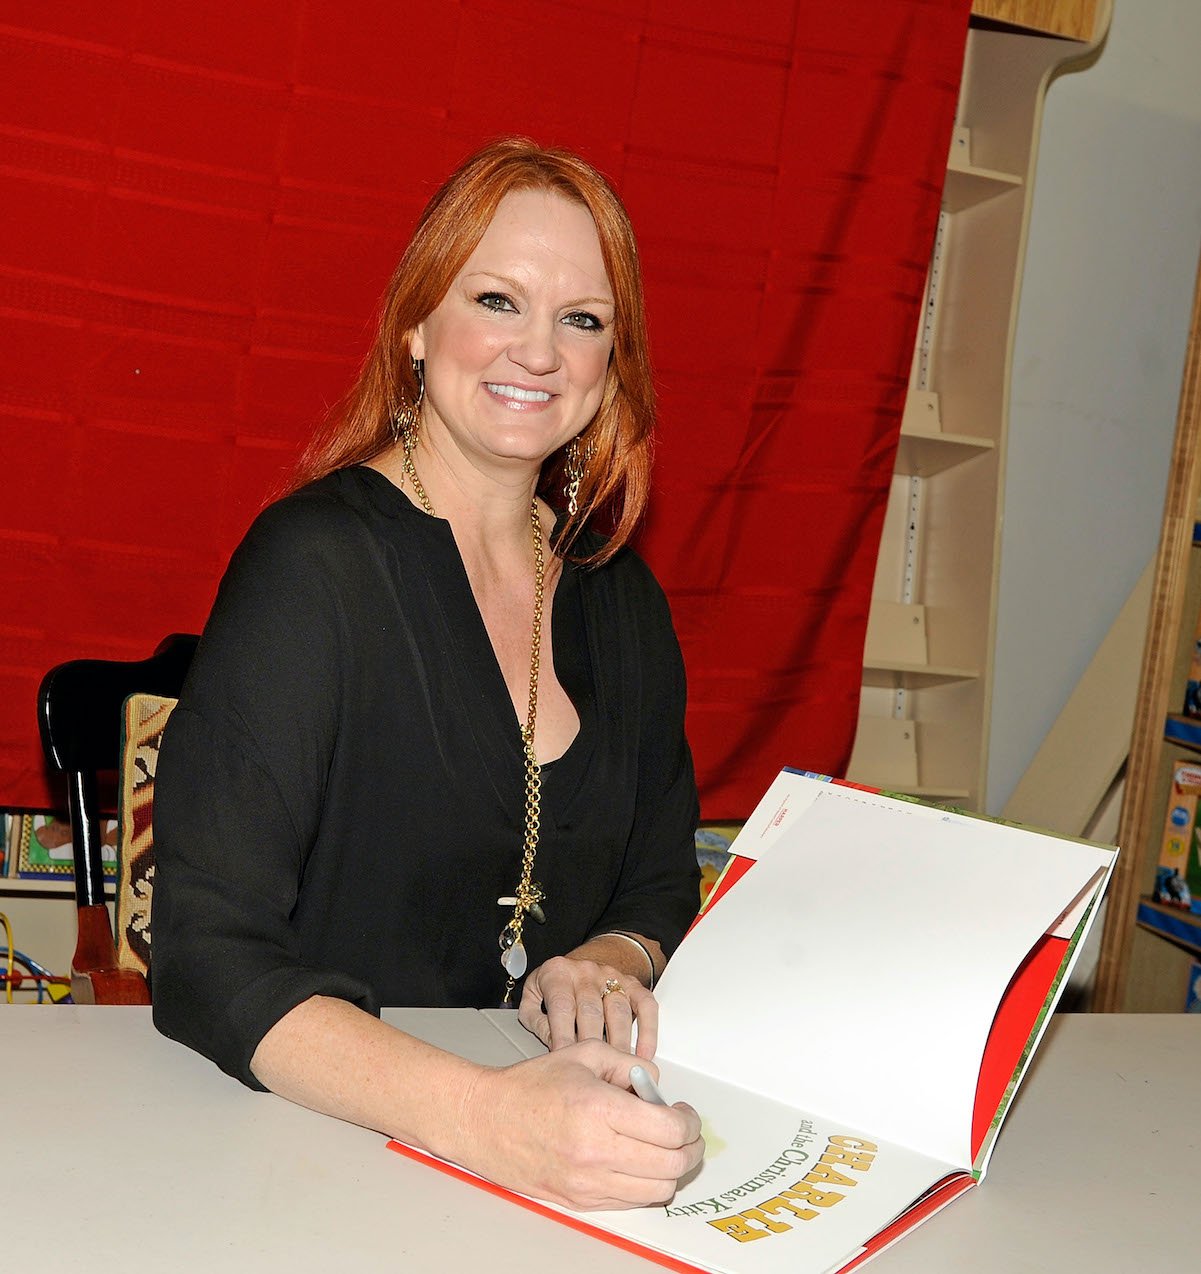 Ree Drummond attends a book signing in 2012